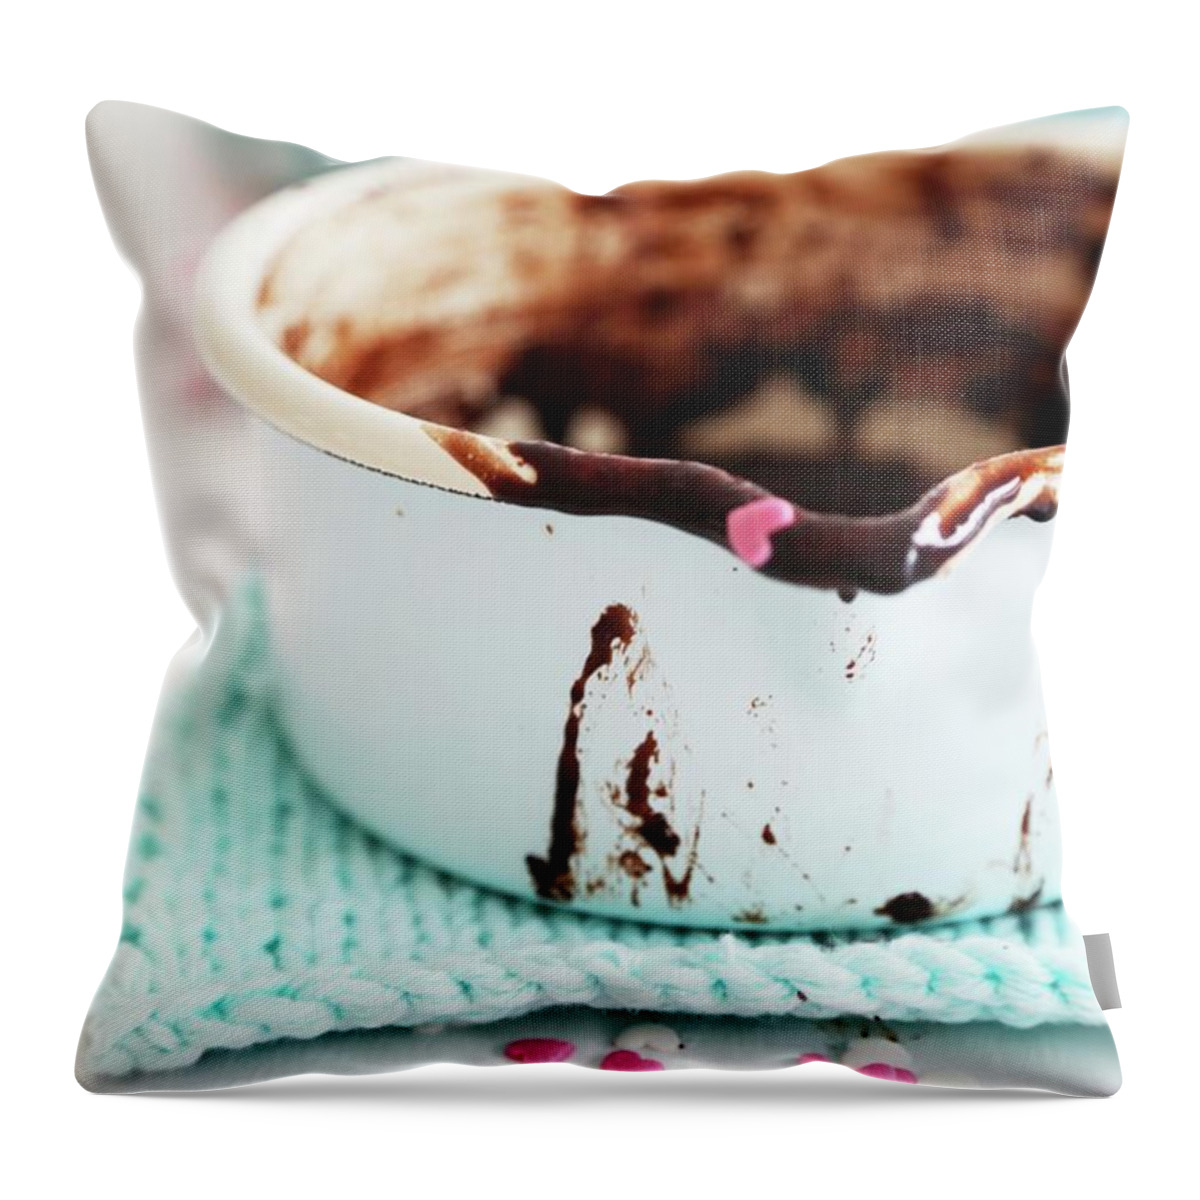 Ip_11253235 Throw Pillow featuring the photograph Leftover Chocolate Sauce In An Enamel Pot by Syl Loves